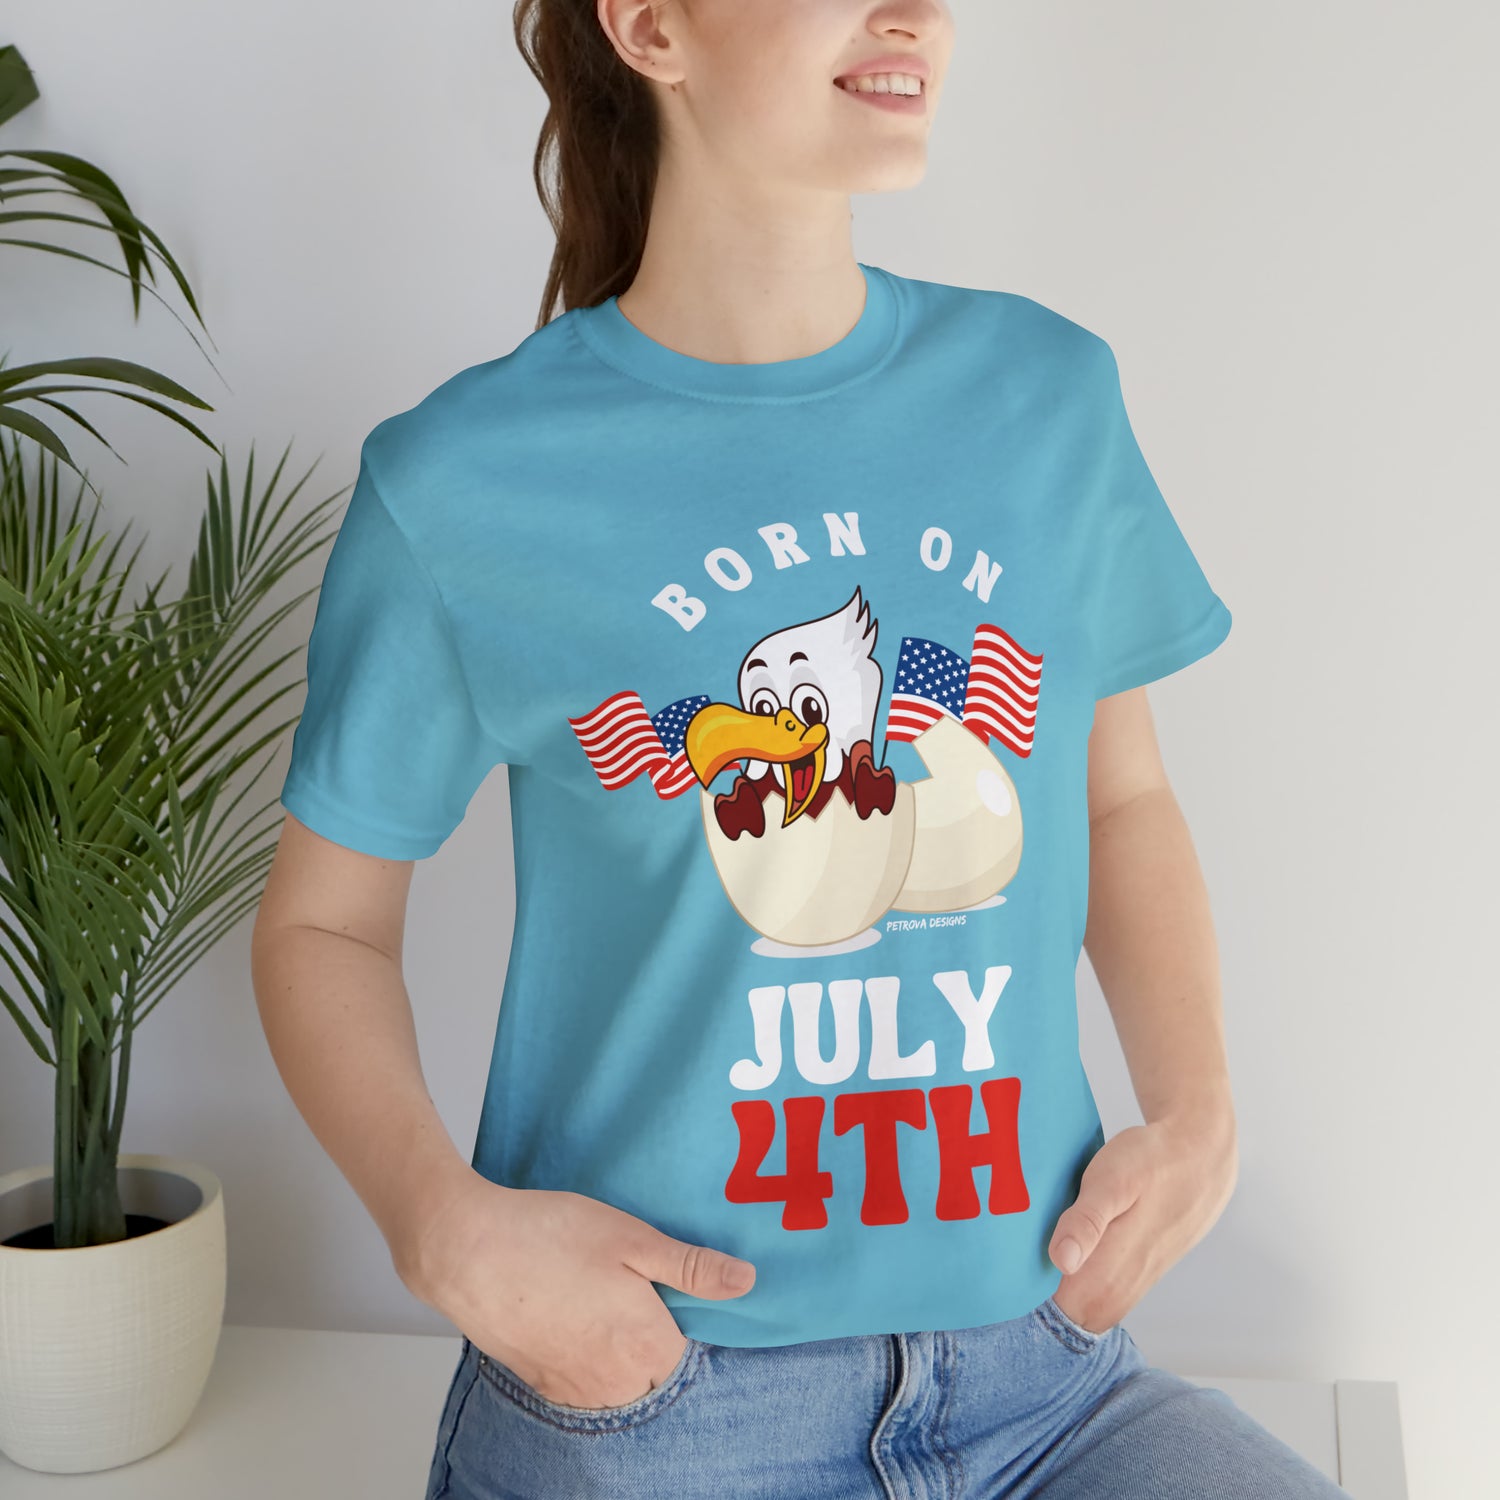 Turquoise T-Shirt Tshirt Design Gift for Friend and Family Short Sleeved Shirt 4th of July Independence Day Petrova Designs